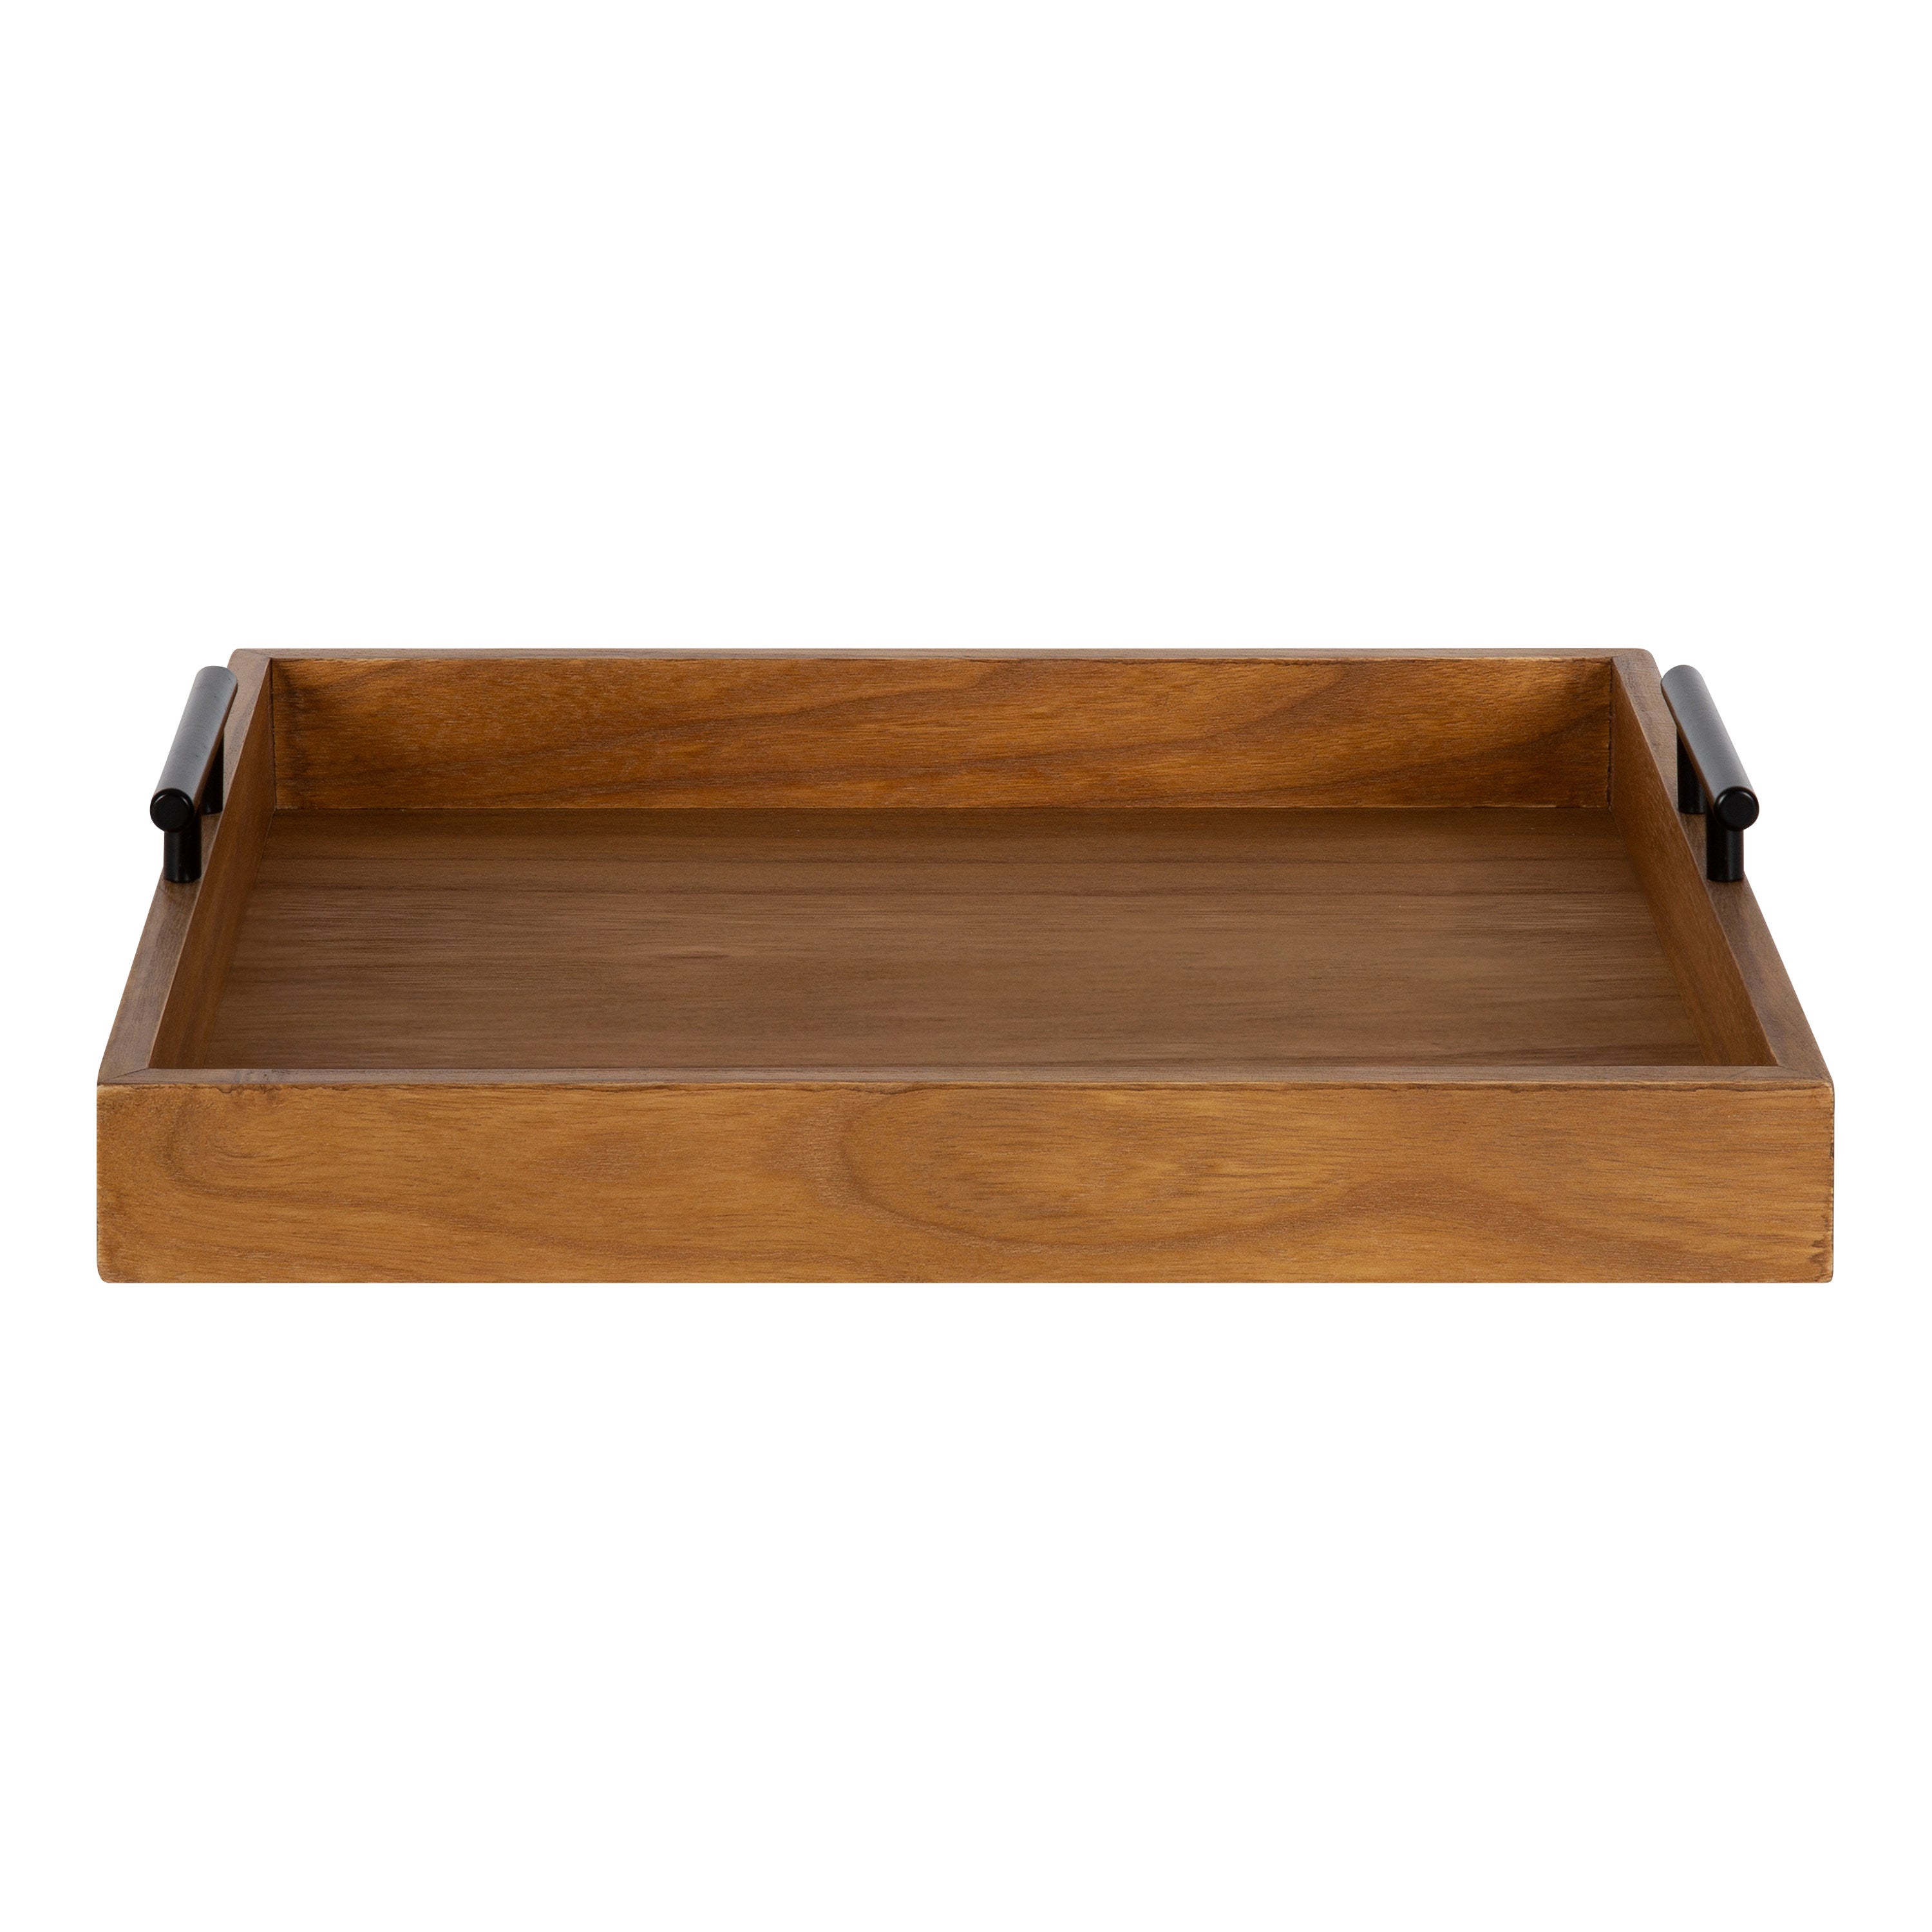 Lipton Square Decorative Wood Tray with Metal Handles